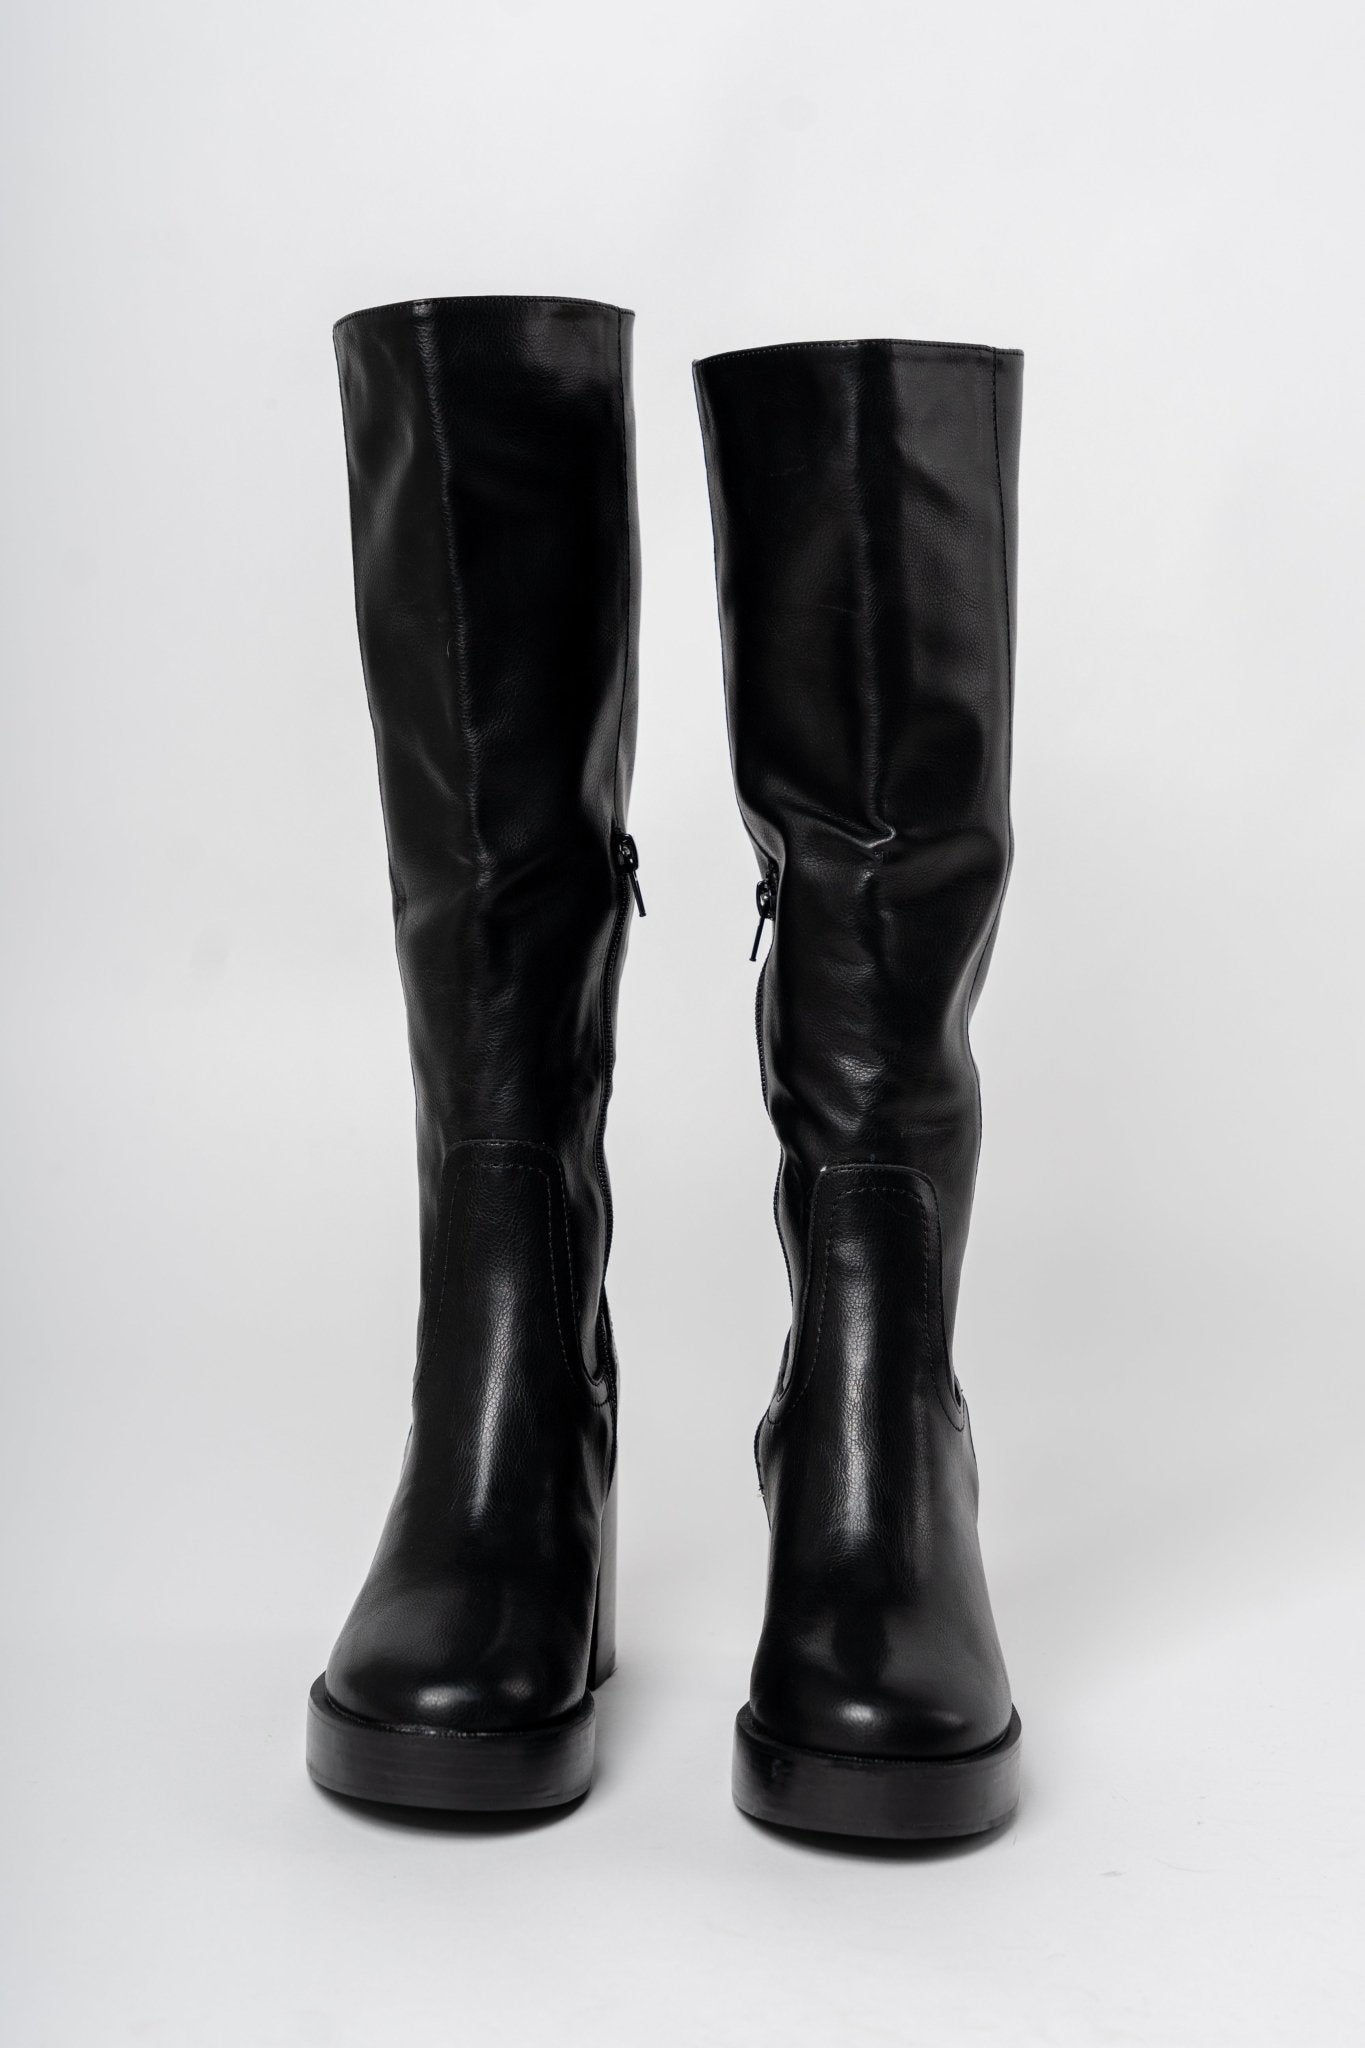 Juniper platform knee high boot black - Trendy shoes - Fashion Shoes at Lush Fashion Lounge Boutique in Oklahoma City